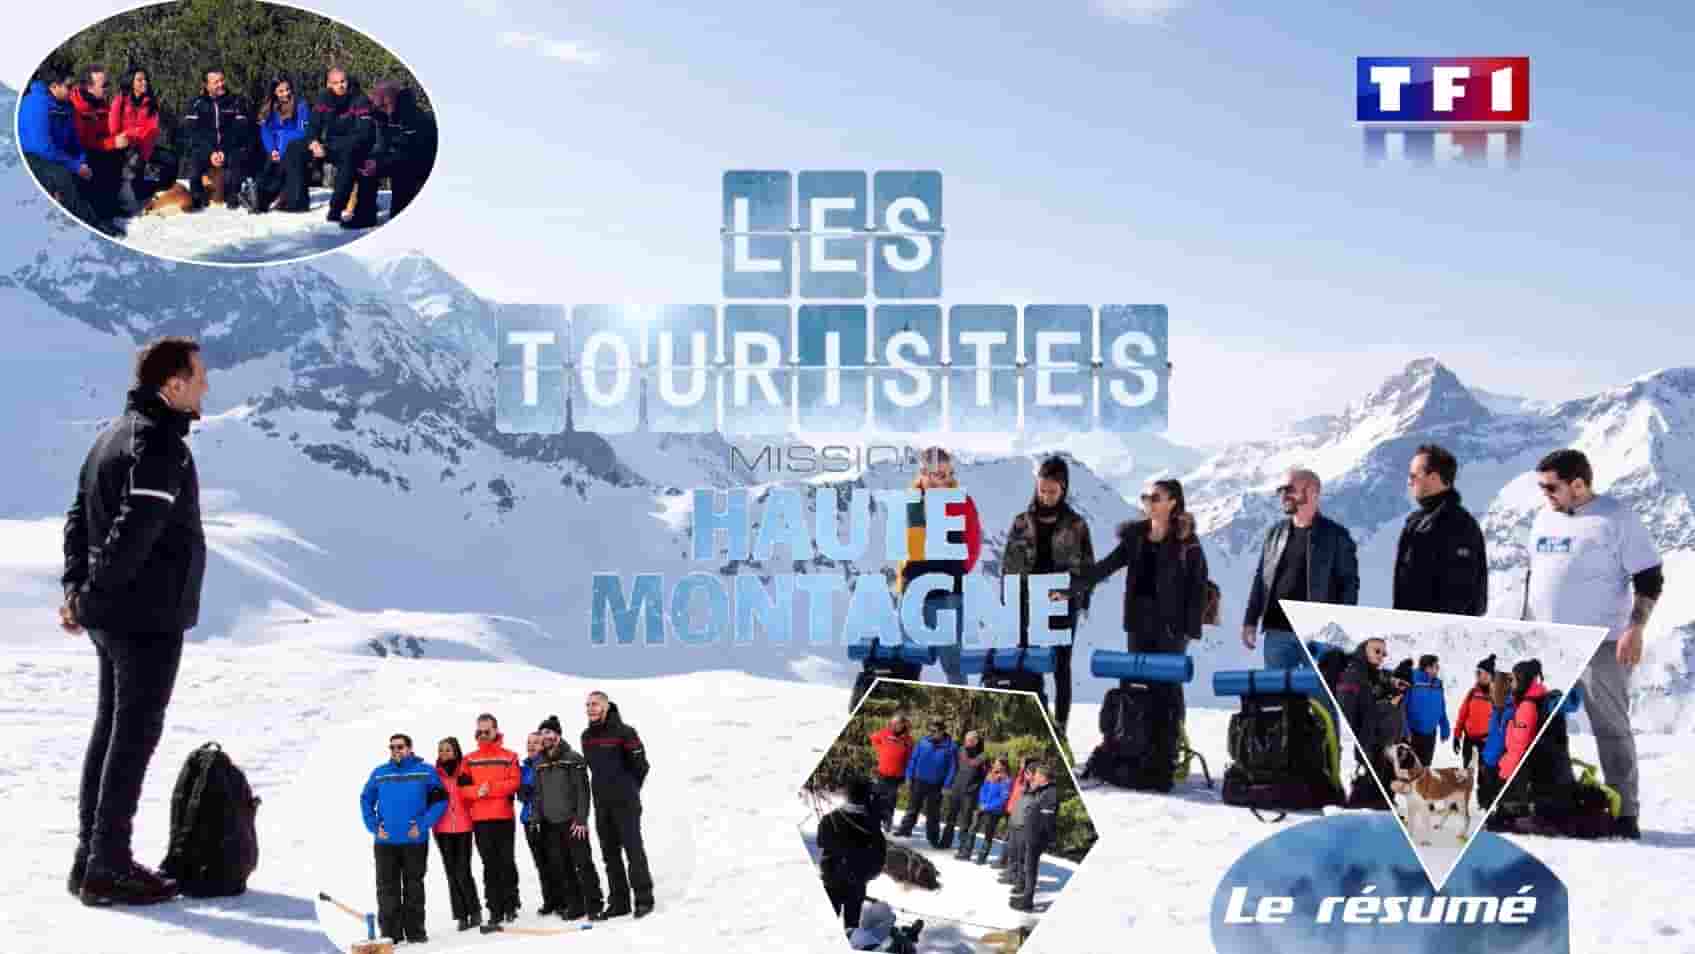 Les Touristes Mission Haute Montagne - ©/-\ll in One TV, All rights reserved. Do not copy. Reproduction Interdite